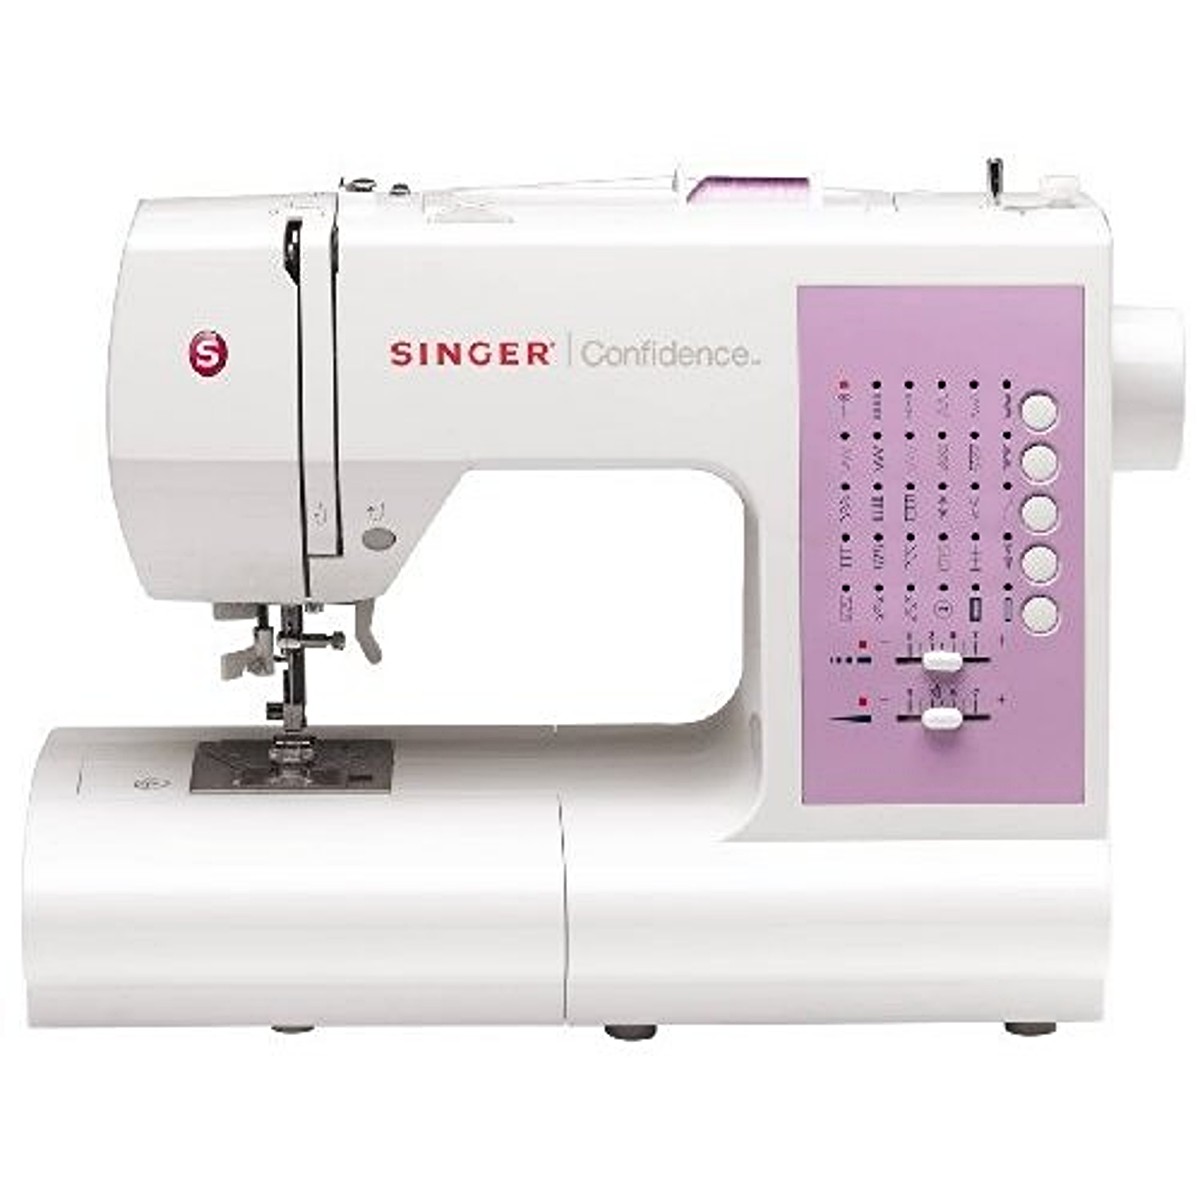 Singer Confidence 7463 Sewing Machine